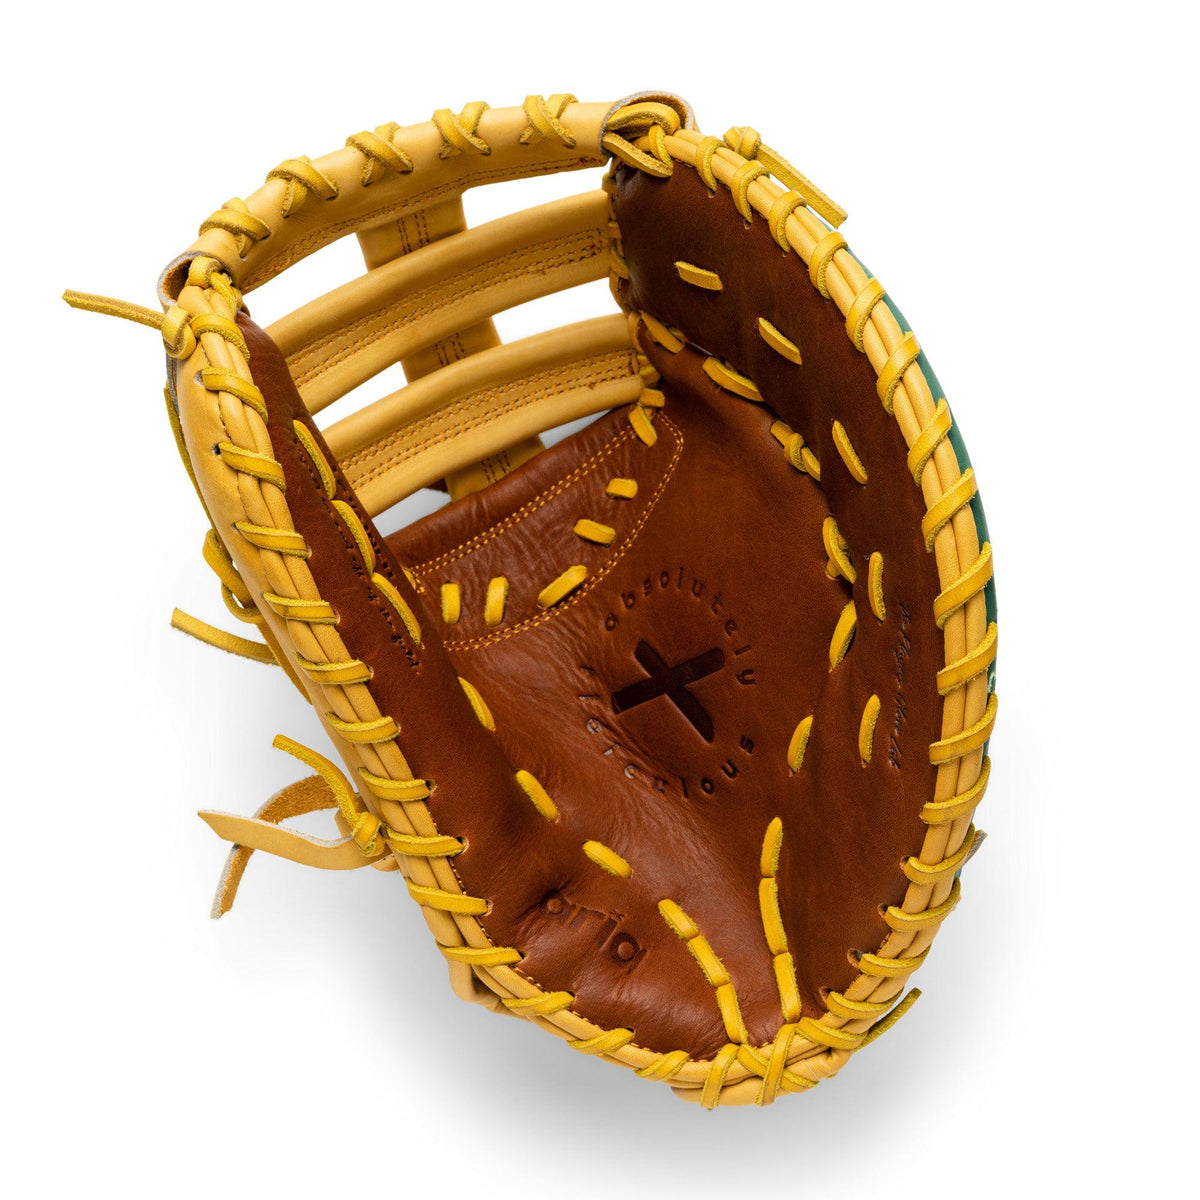 taco glove  first base – Absolutely Ridiculous innovation for